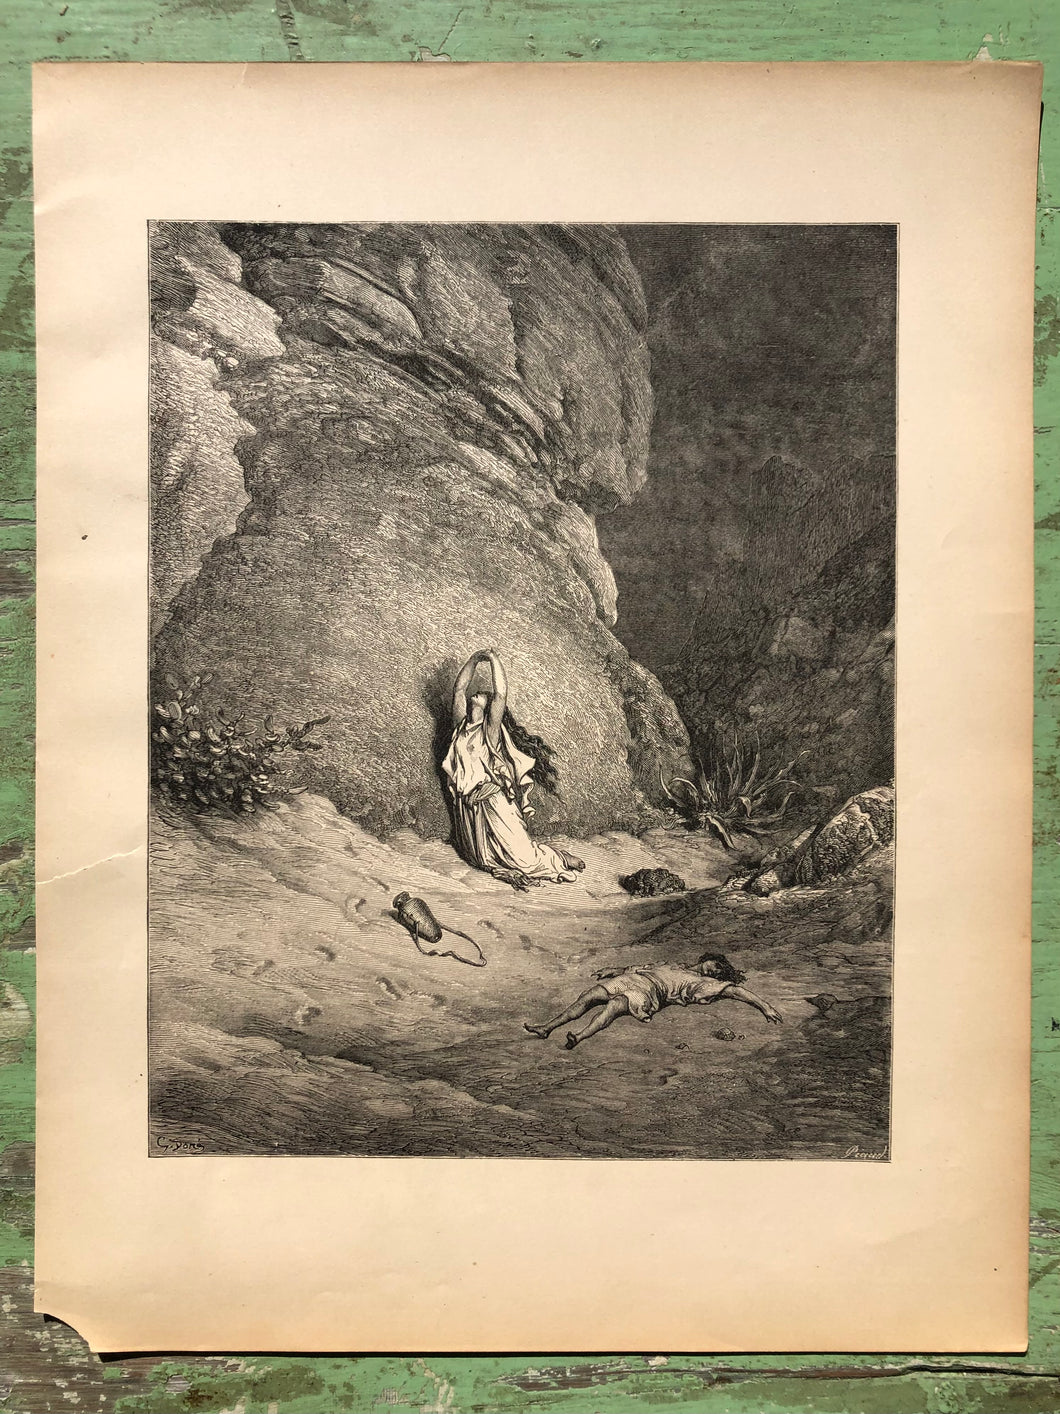 Hagar in the Wilderness. From The Dore Bible Gallery by Gustave Dore